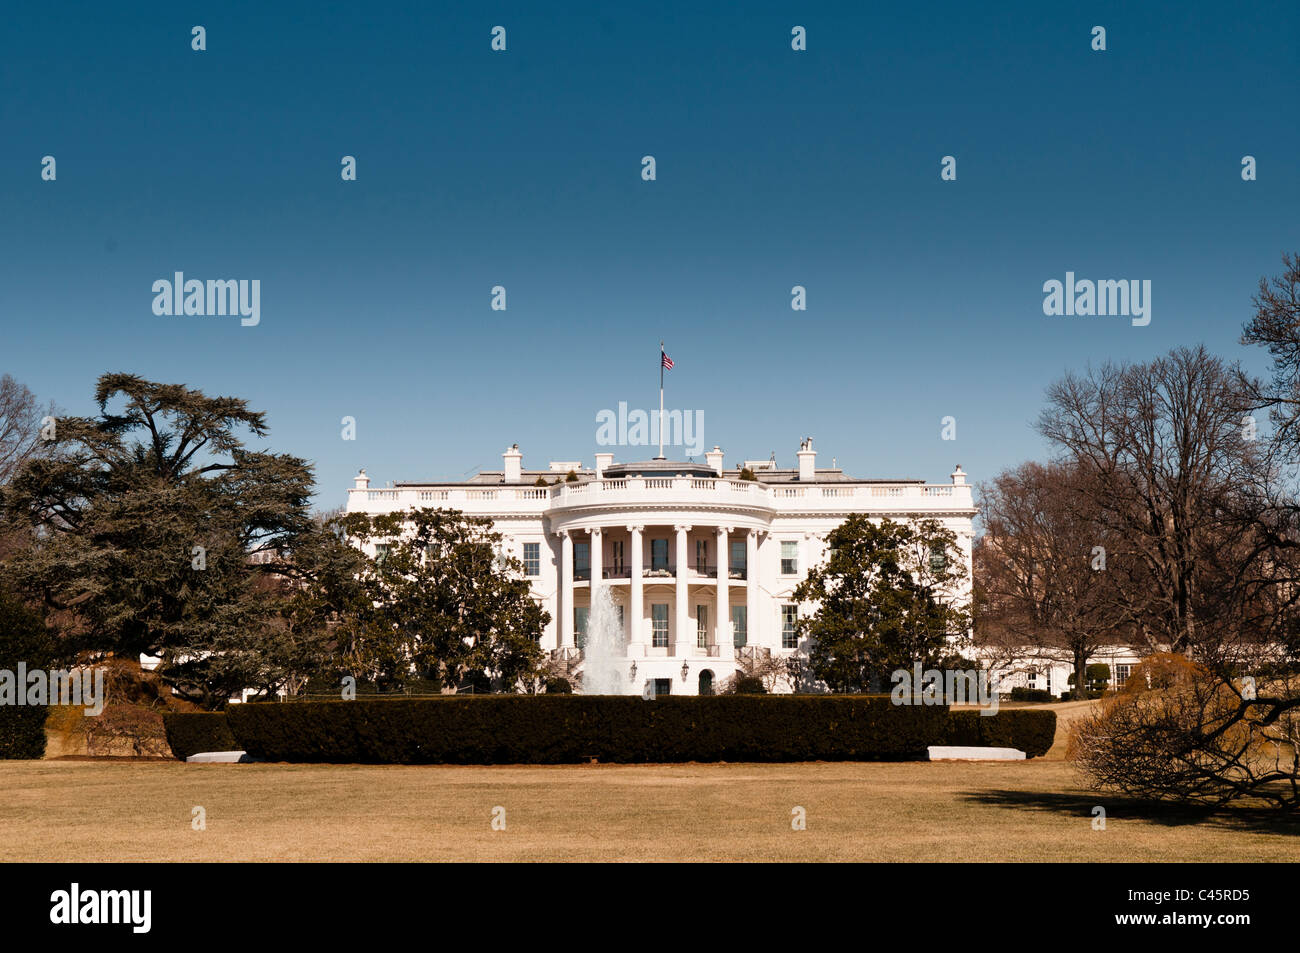 WASHINGTON DC, USA - The White House with clear blue sky. The home and office of the President of the United States, the White House is at 1600 Pennsylvania Ave NW, Washington DC. Stock Photo